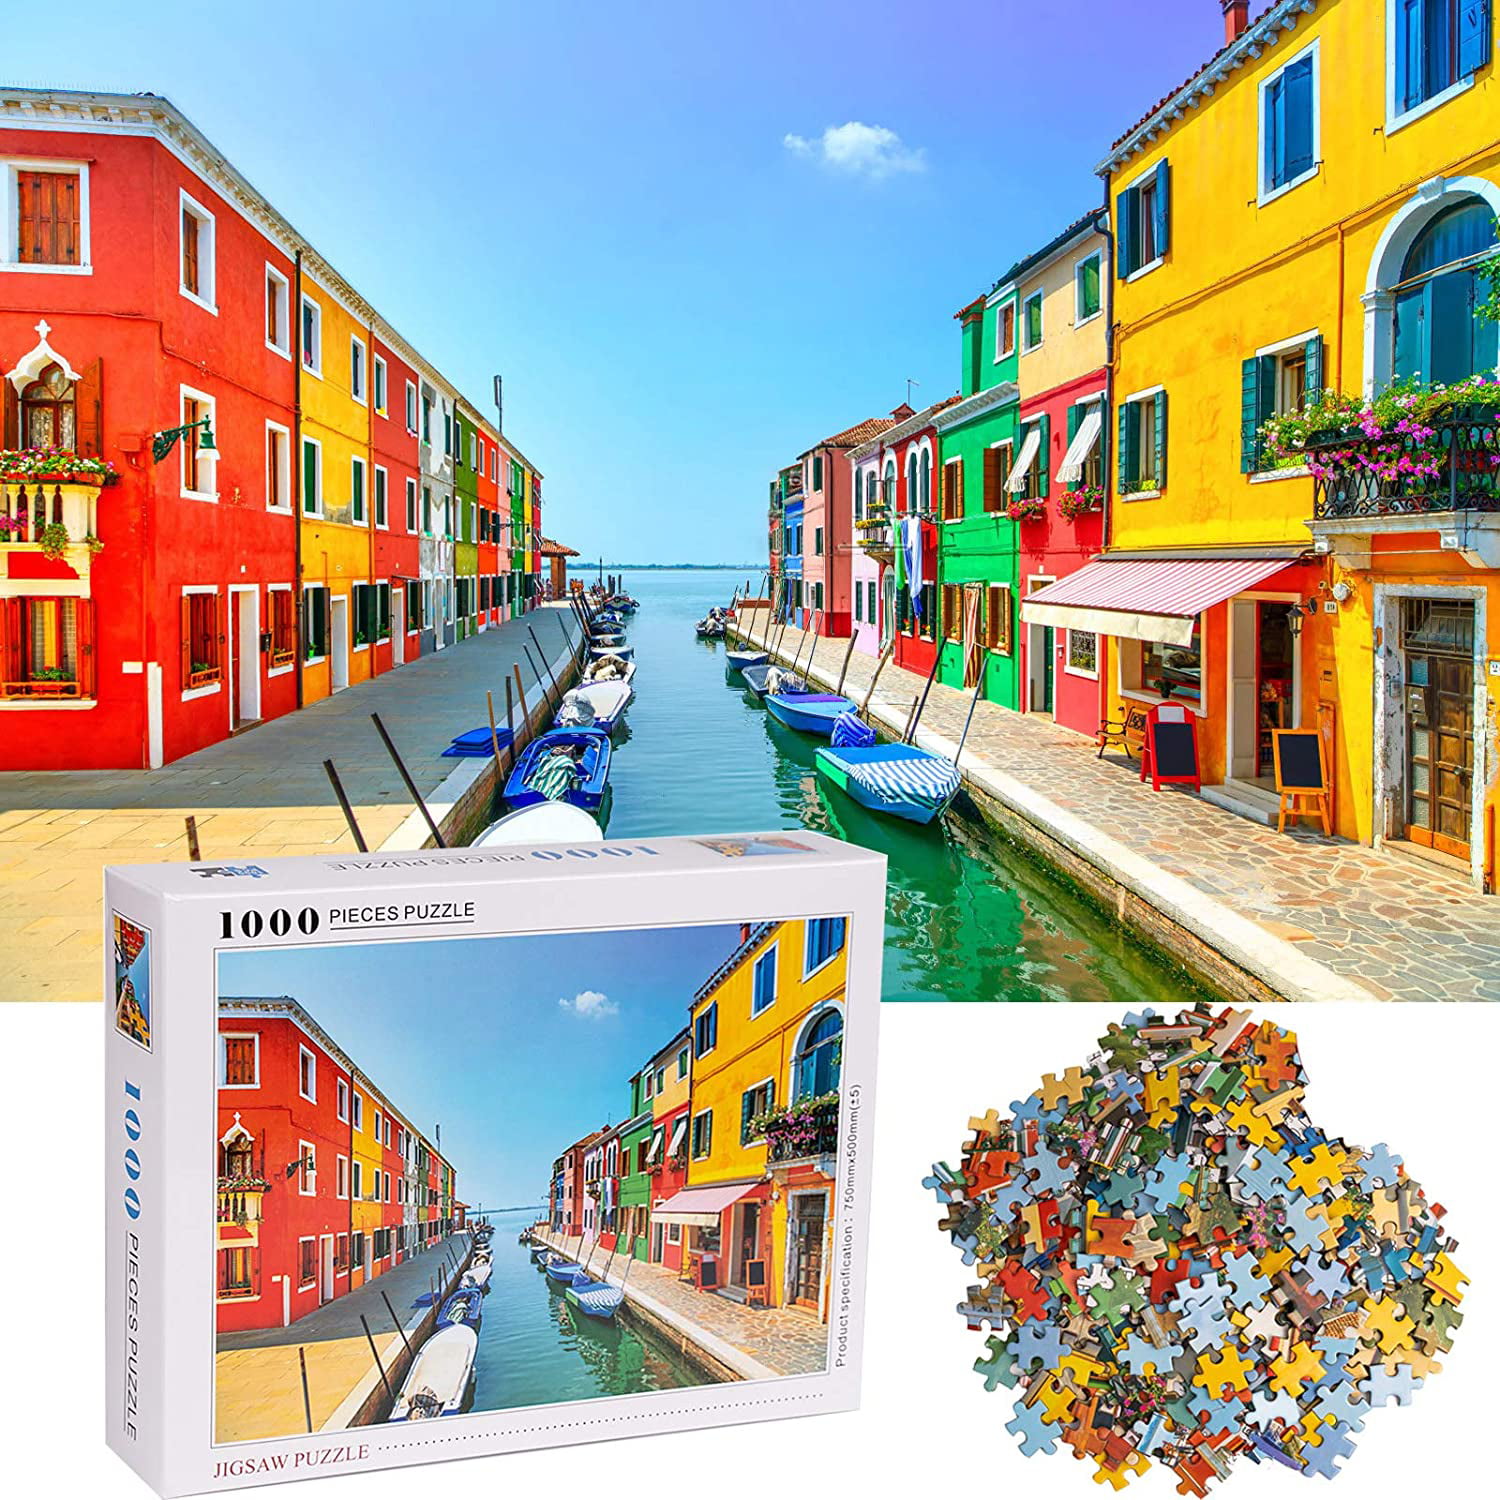 Fun Puzzle Educational Family Game Toys Gift for Adults Teens Colorful Venice Burano Jigsaw Puzzles 1000 Piece Puzzle for Adults